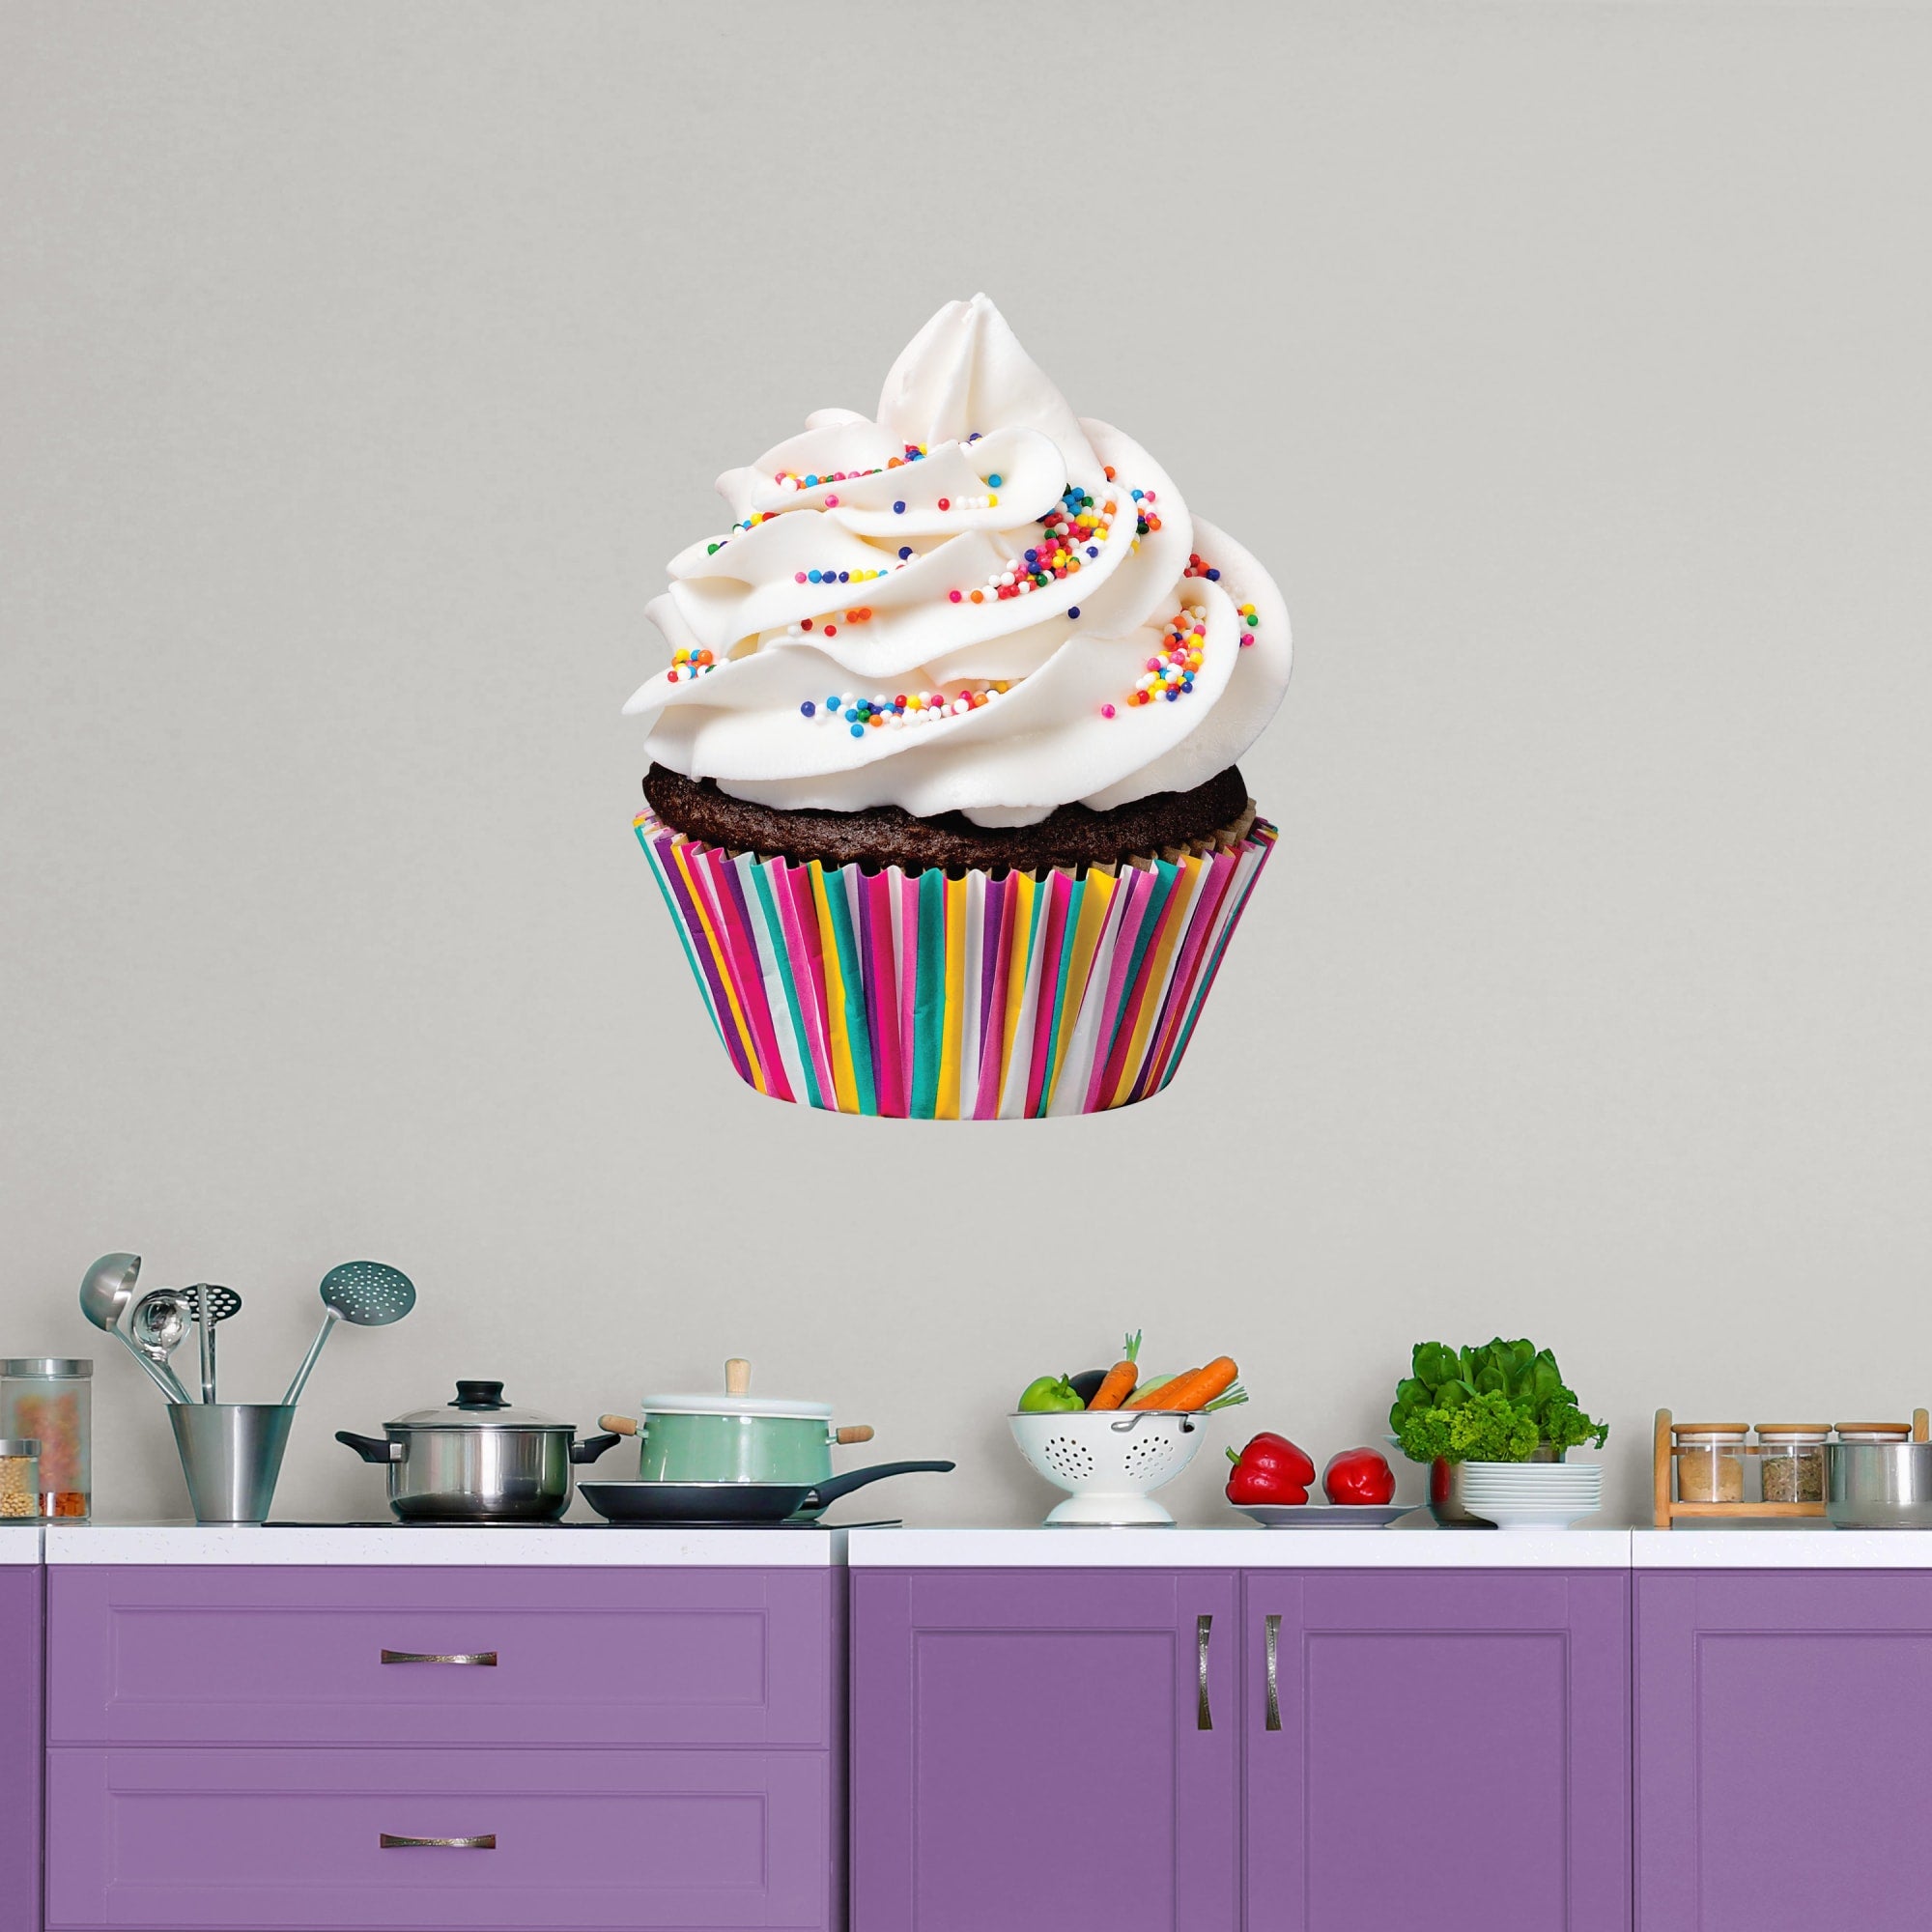 Cupcake - Removable Vinyl Decal Giant Cupcake + 2 Decals (30"W x 37"H) by Fathead